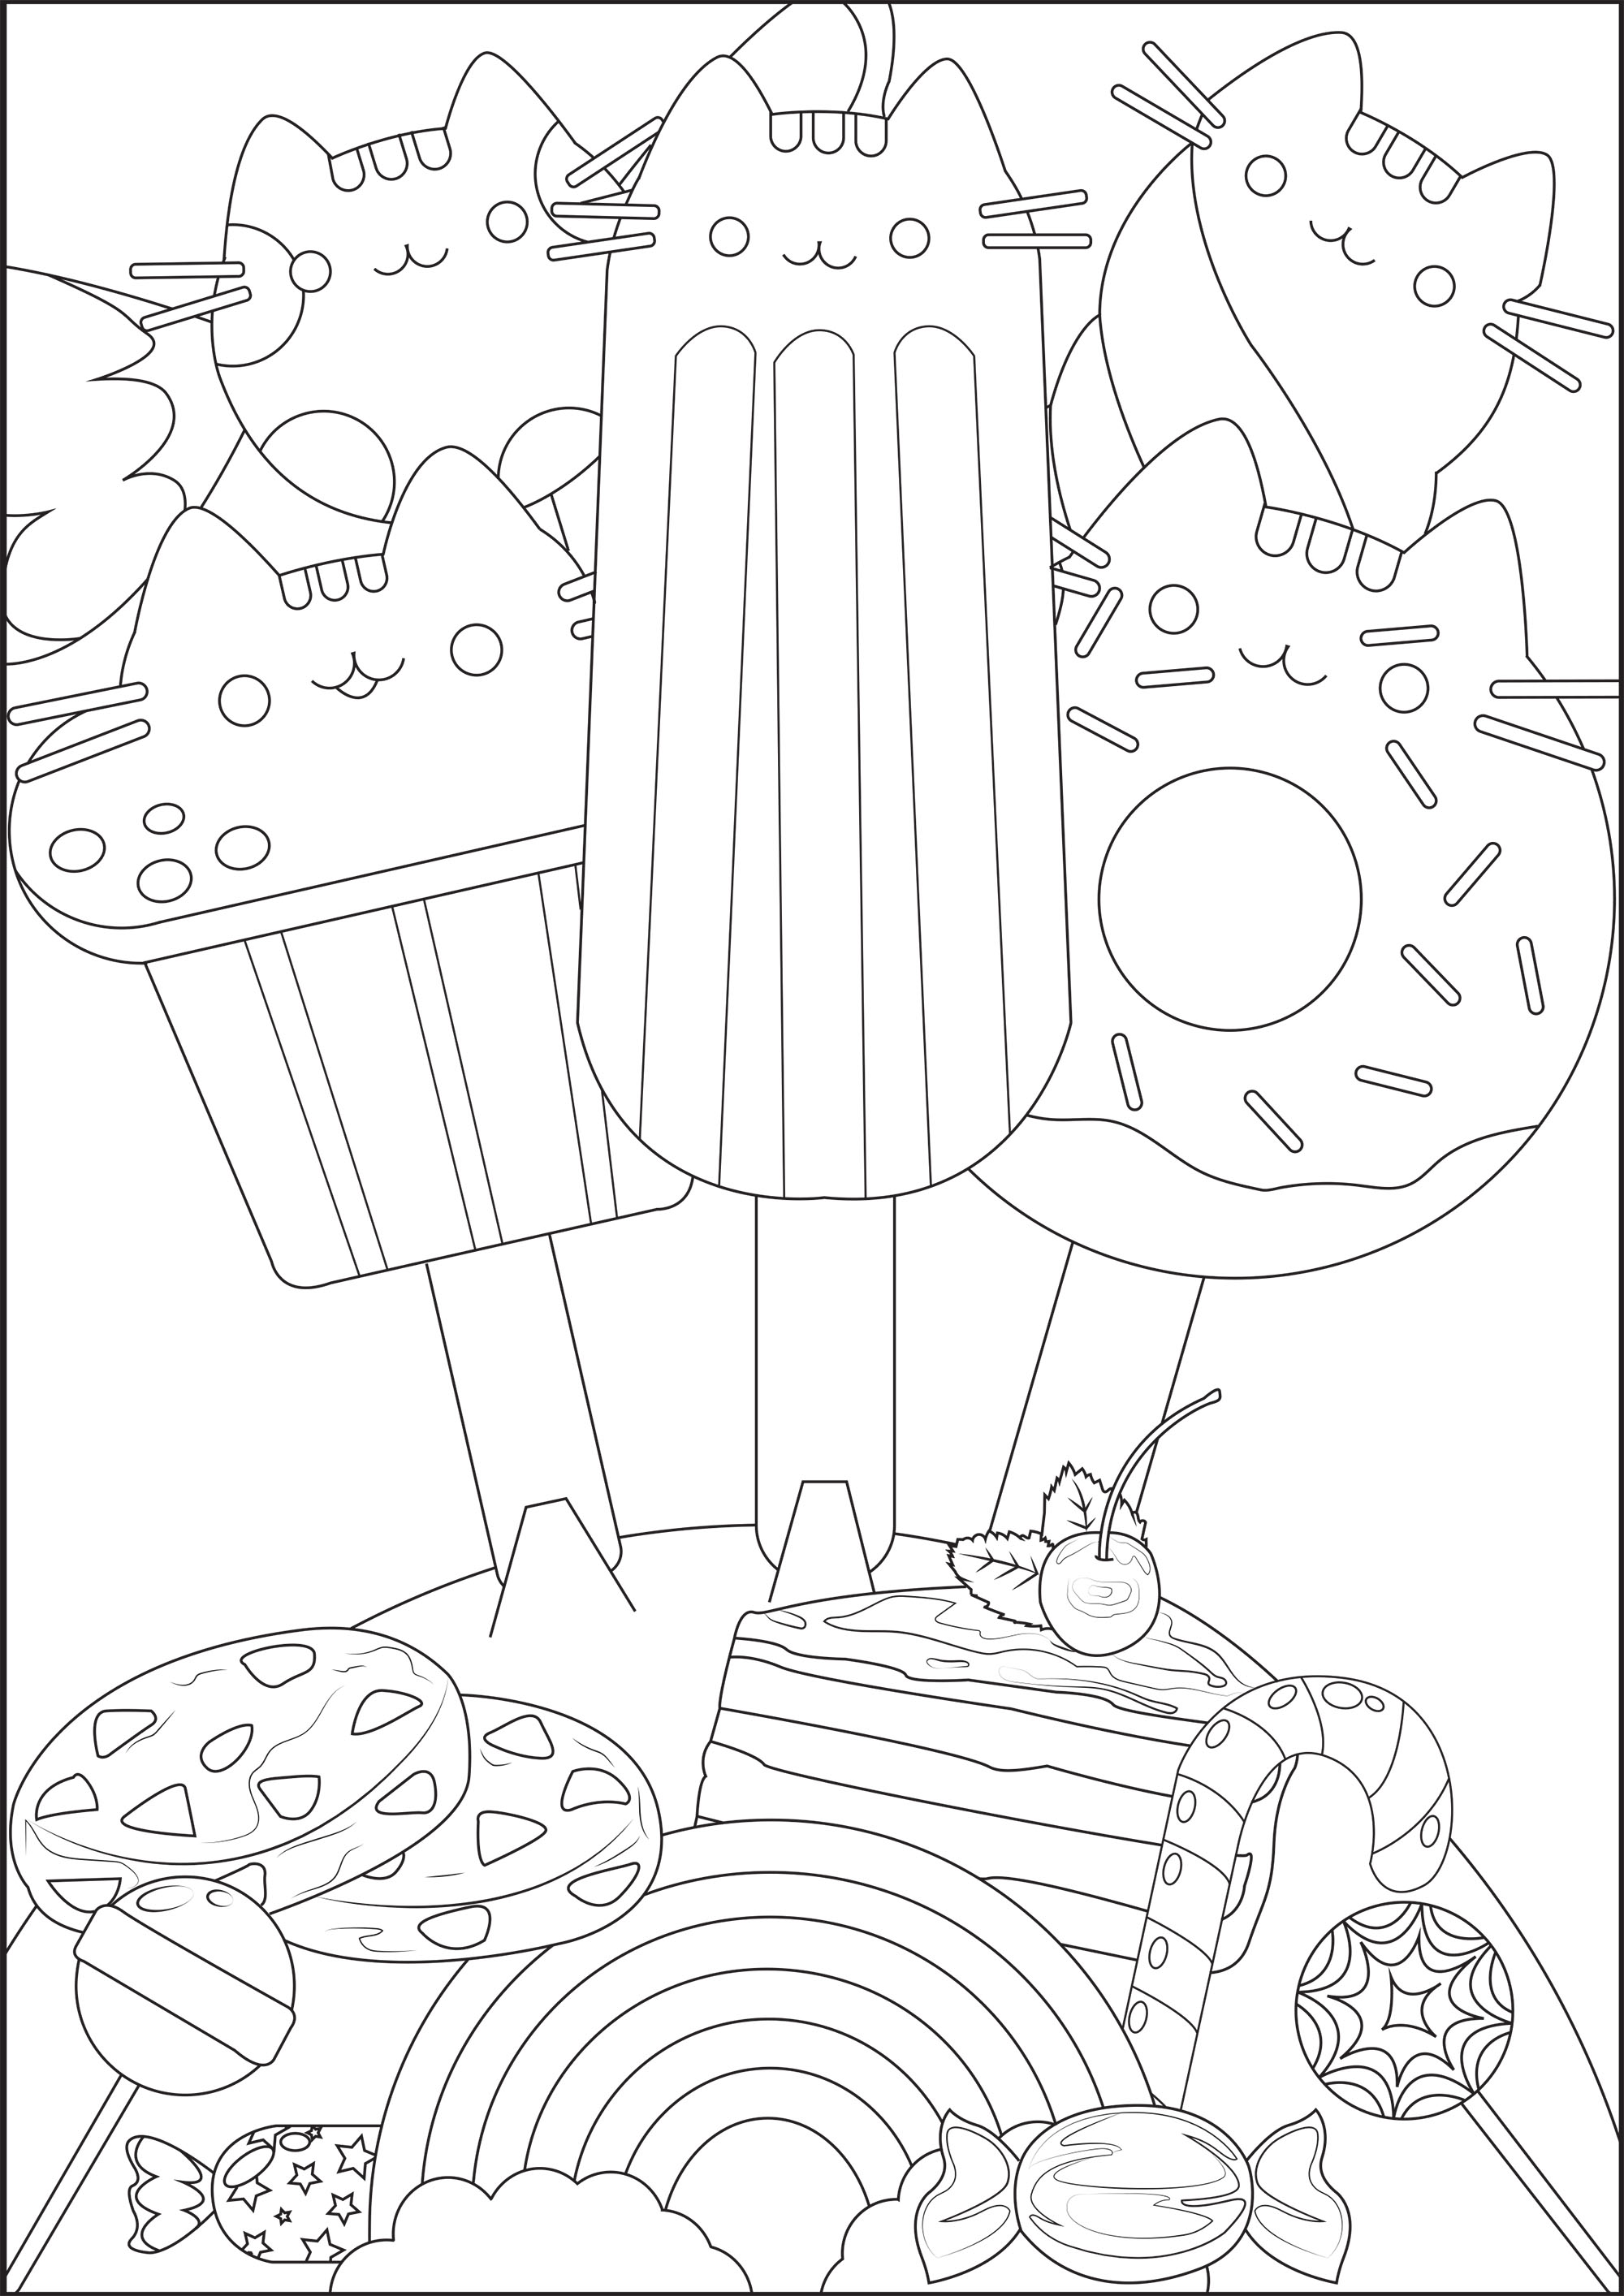 Assorted sweet pusheen - Doodle Art Kids Coloring Pages